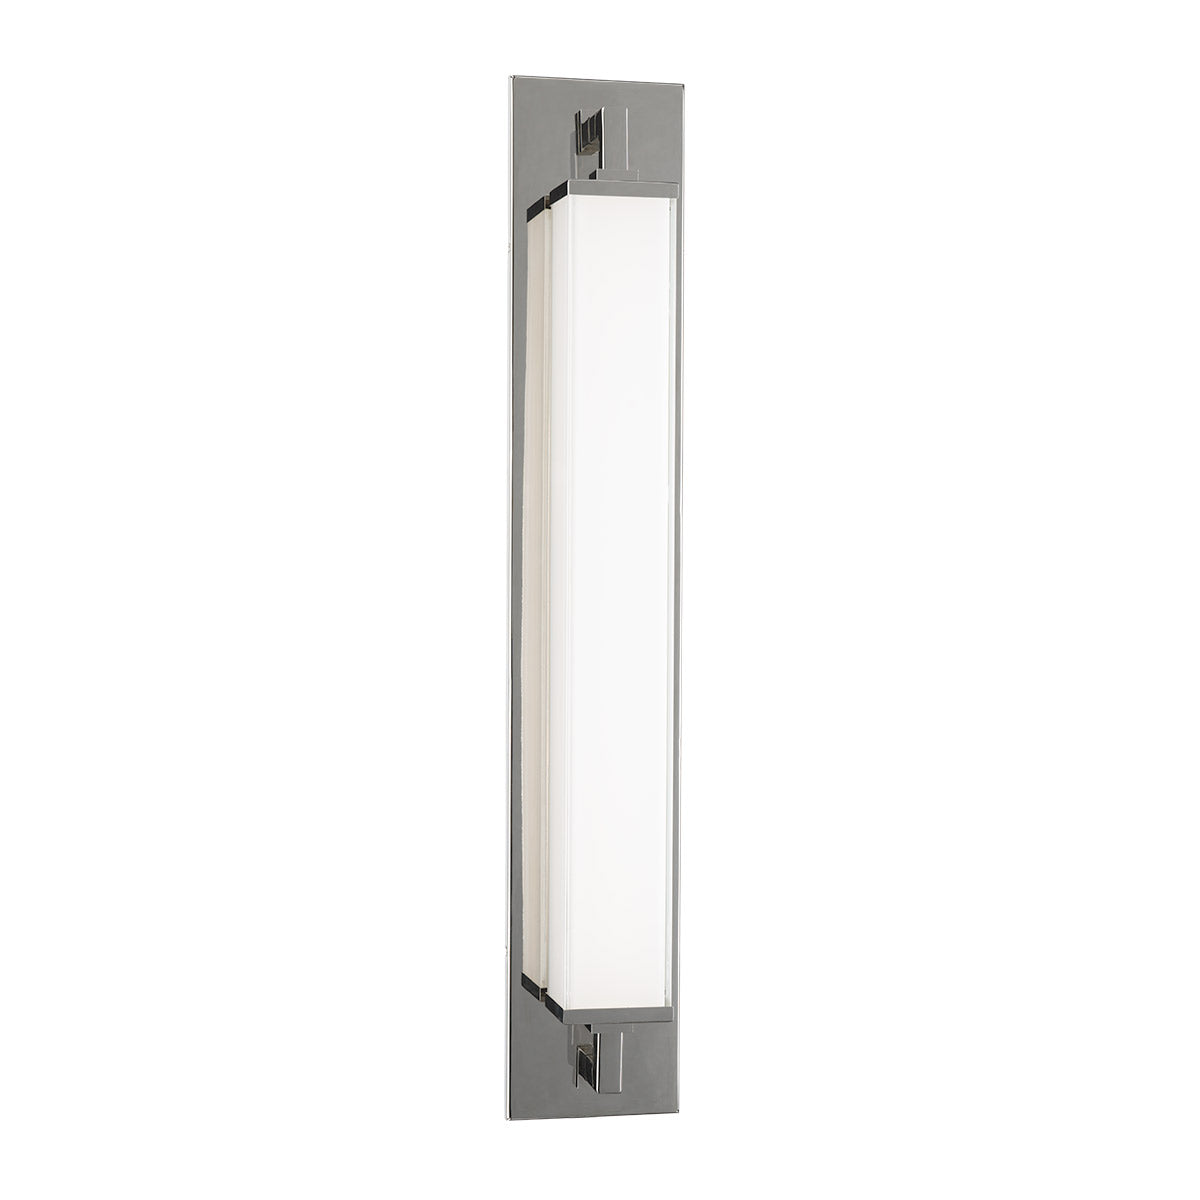 Gatsby 32" LED Wall Sconce